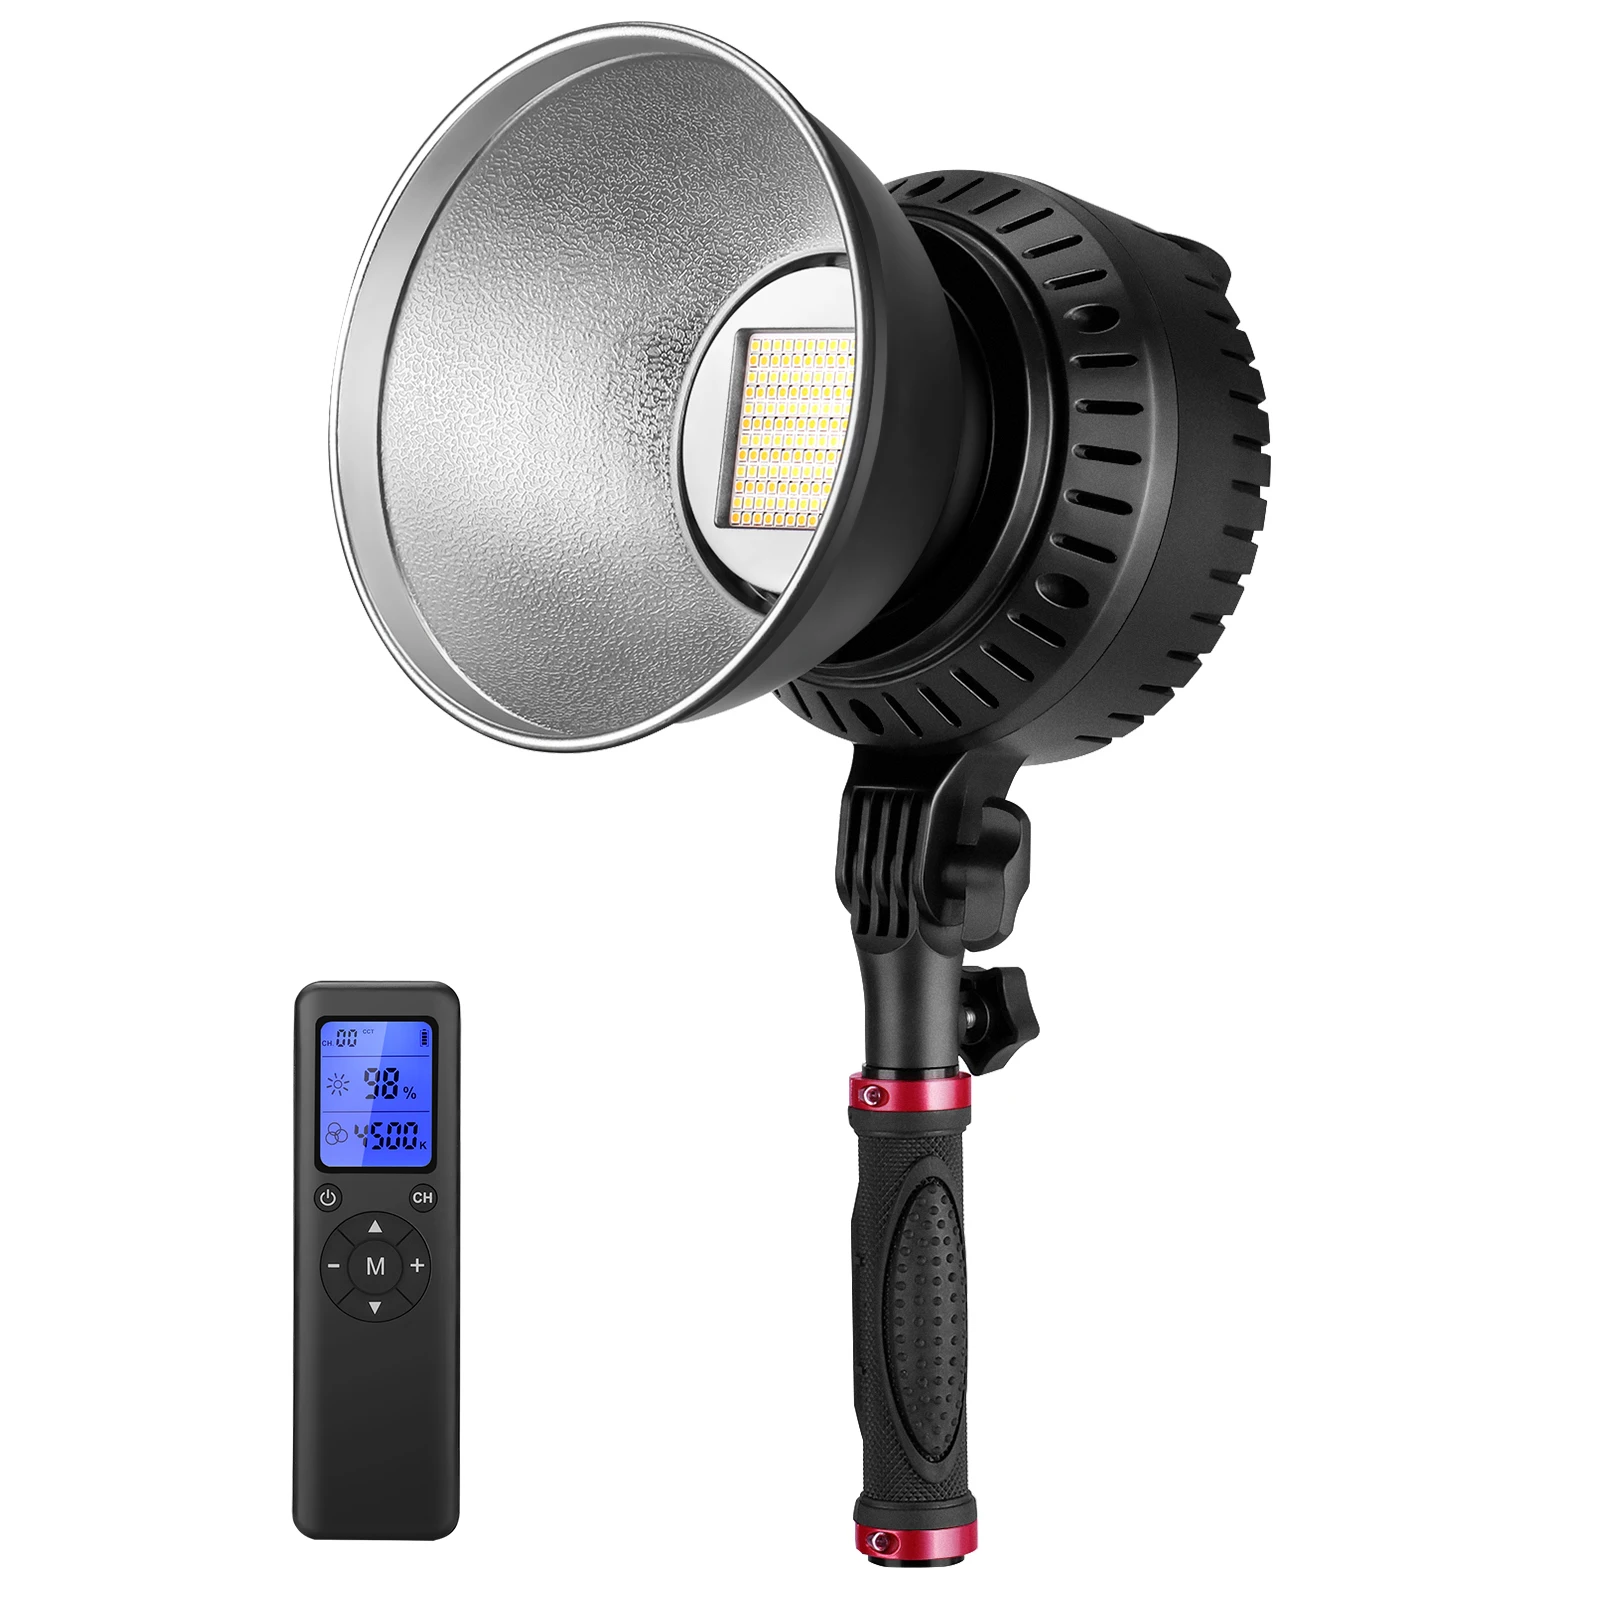 

NEEWER CL-60B Bi-Color 60W LED Video Light, 3200K~5600K Color Temperature, 30000 Lux With Reflector, Silent Fan, Remote Control